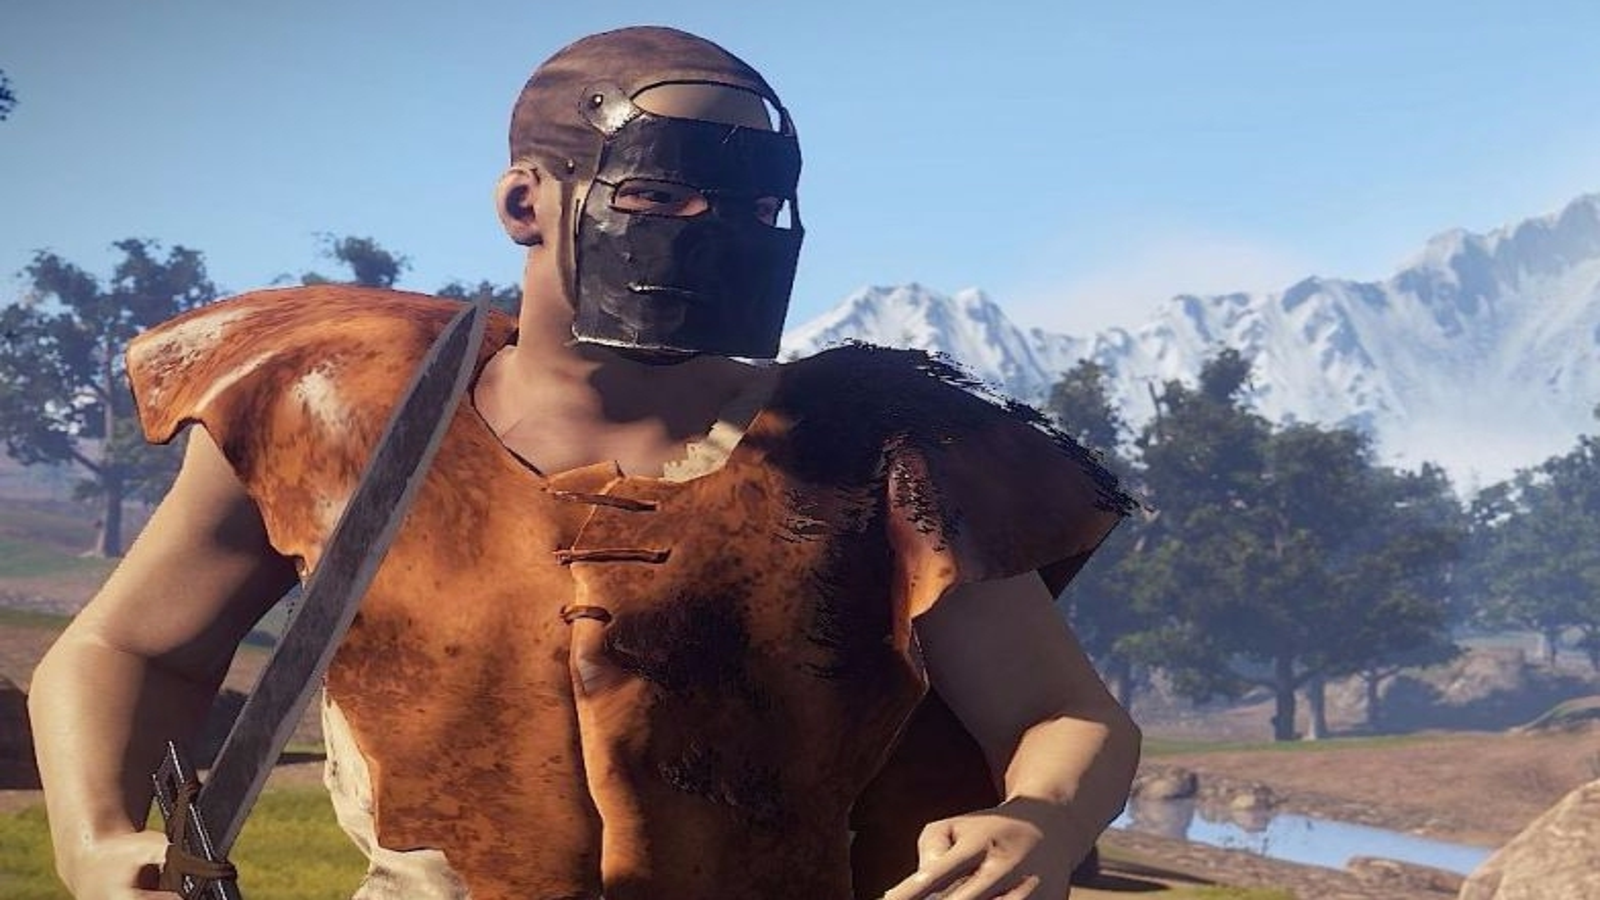 Rust lost a huge sum on the player's refund requests